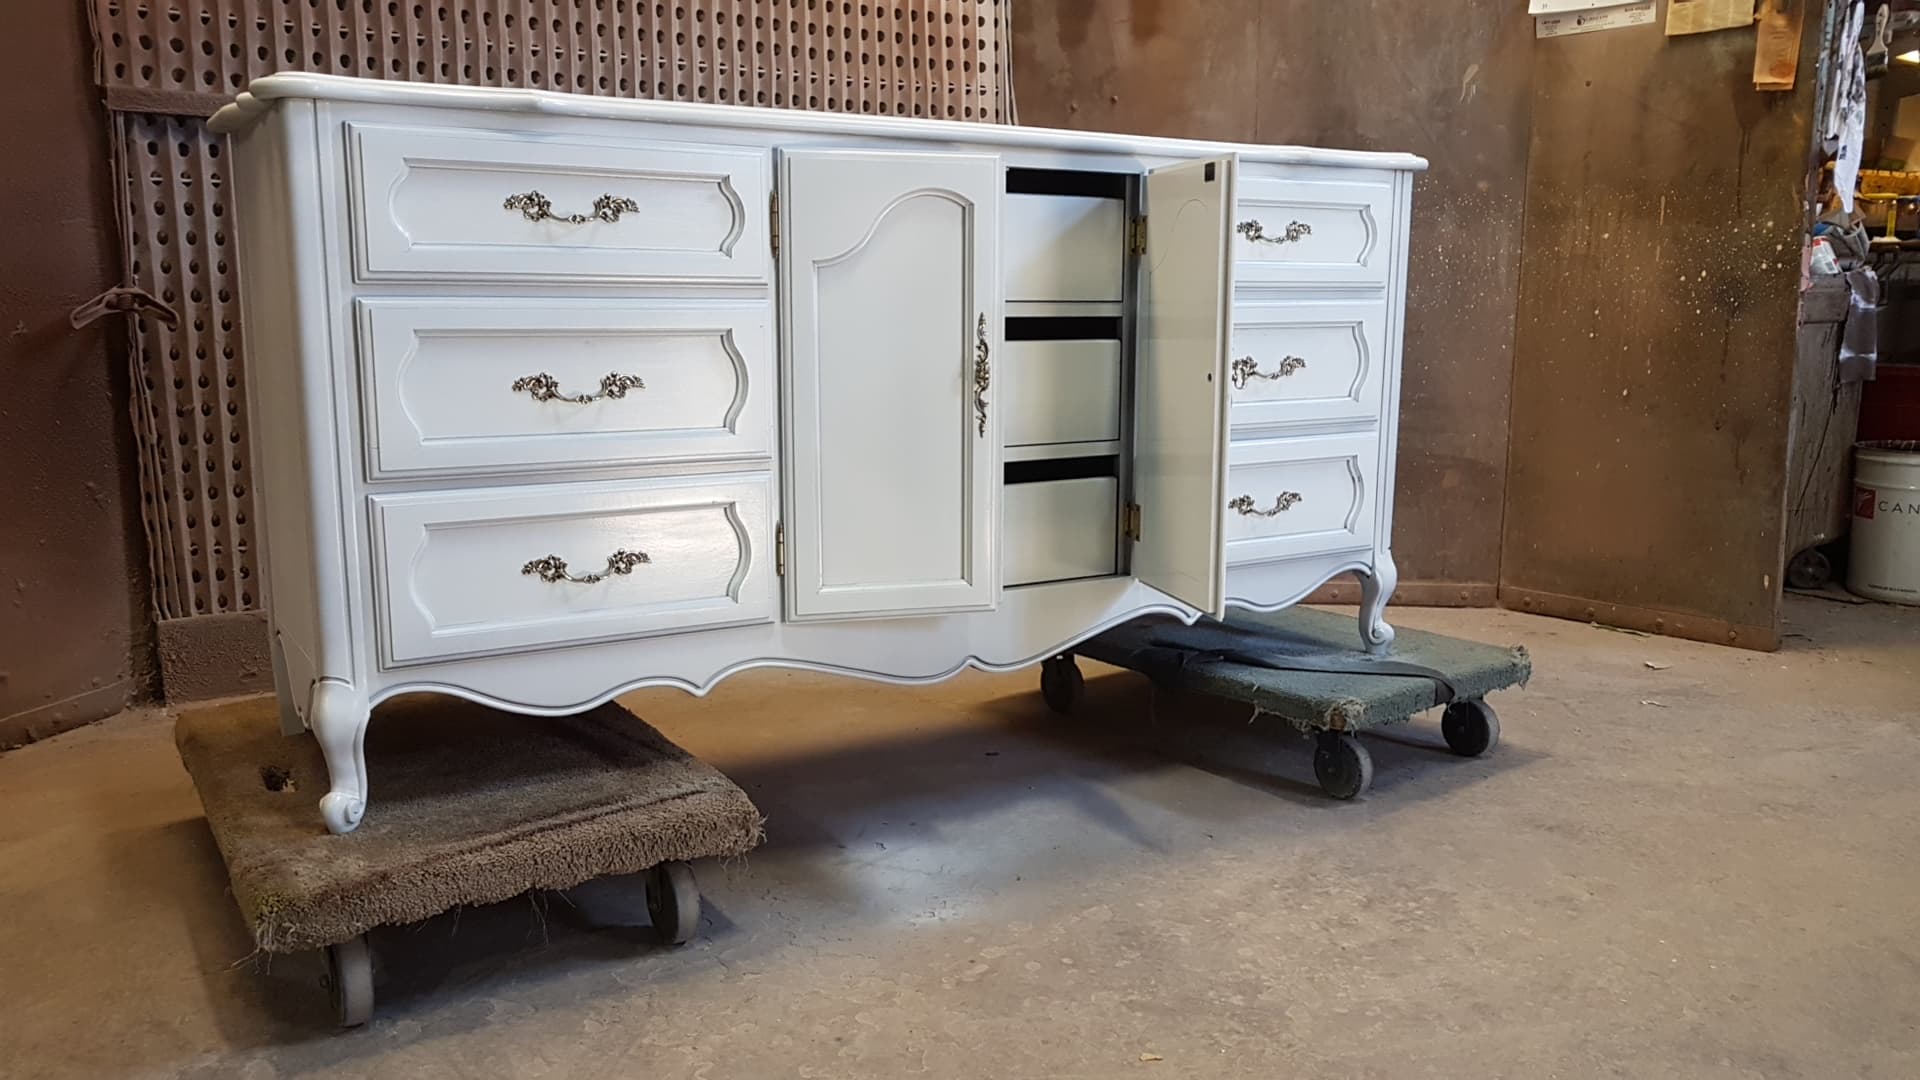 TUP Bedroom dresser with centre doors open showing 3 inside drawers March 2019.jpg